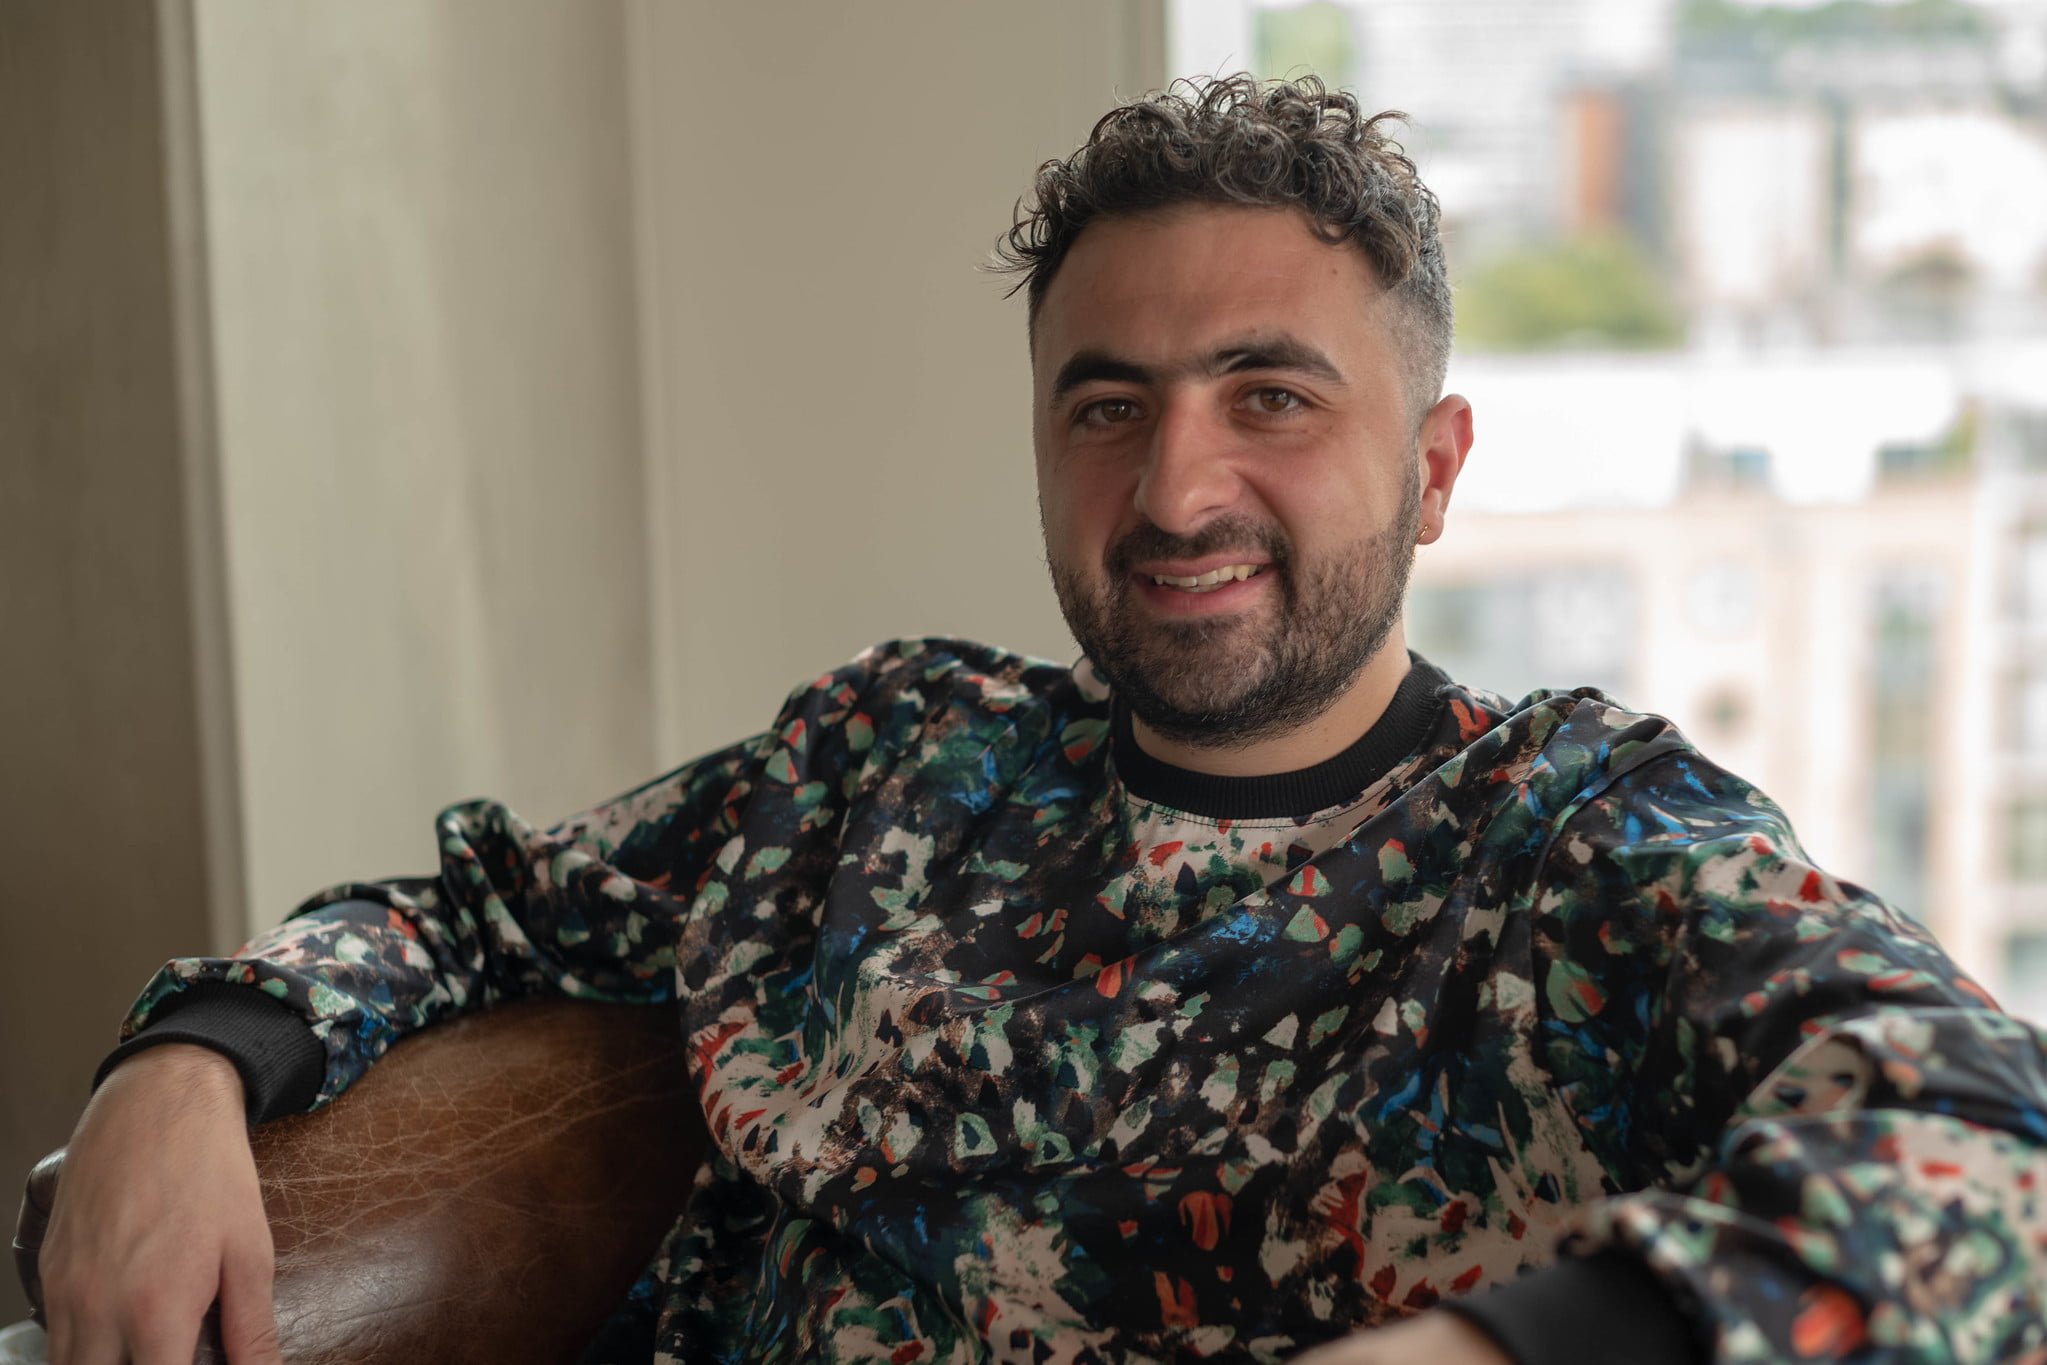 Deepmind founder Mustafa Suleyman sees great potential in AI for mental health